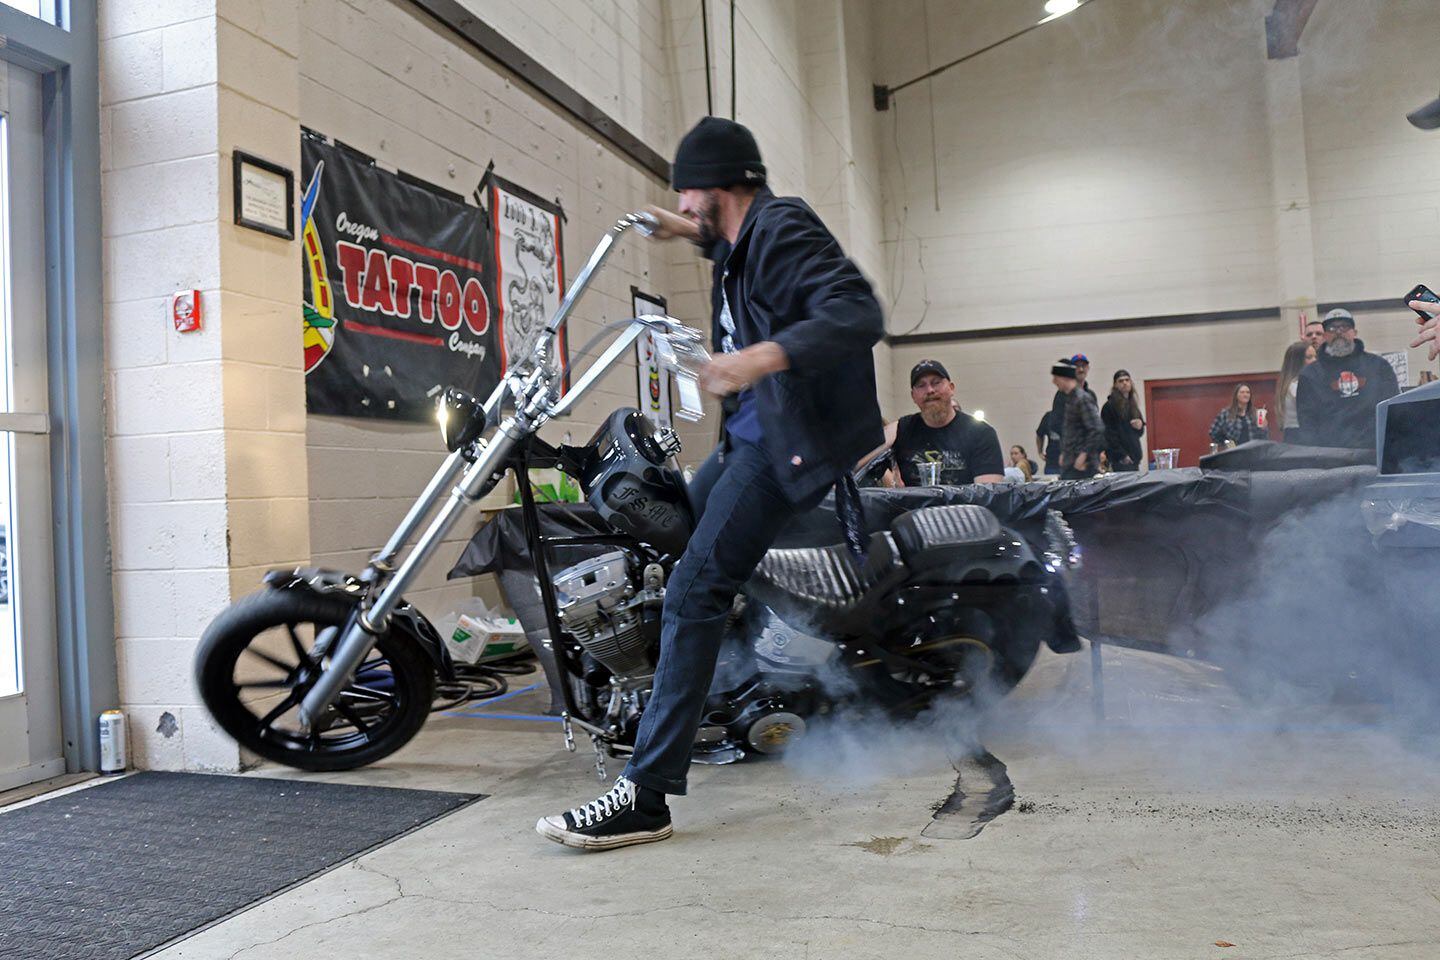 Every good bike show deserves a burnout or two.